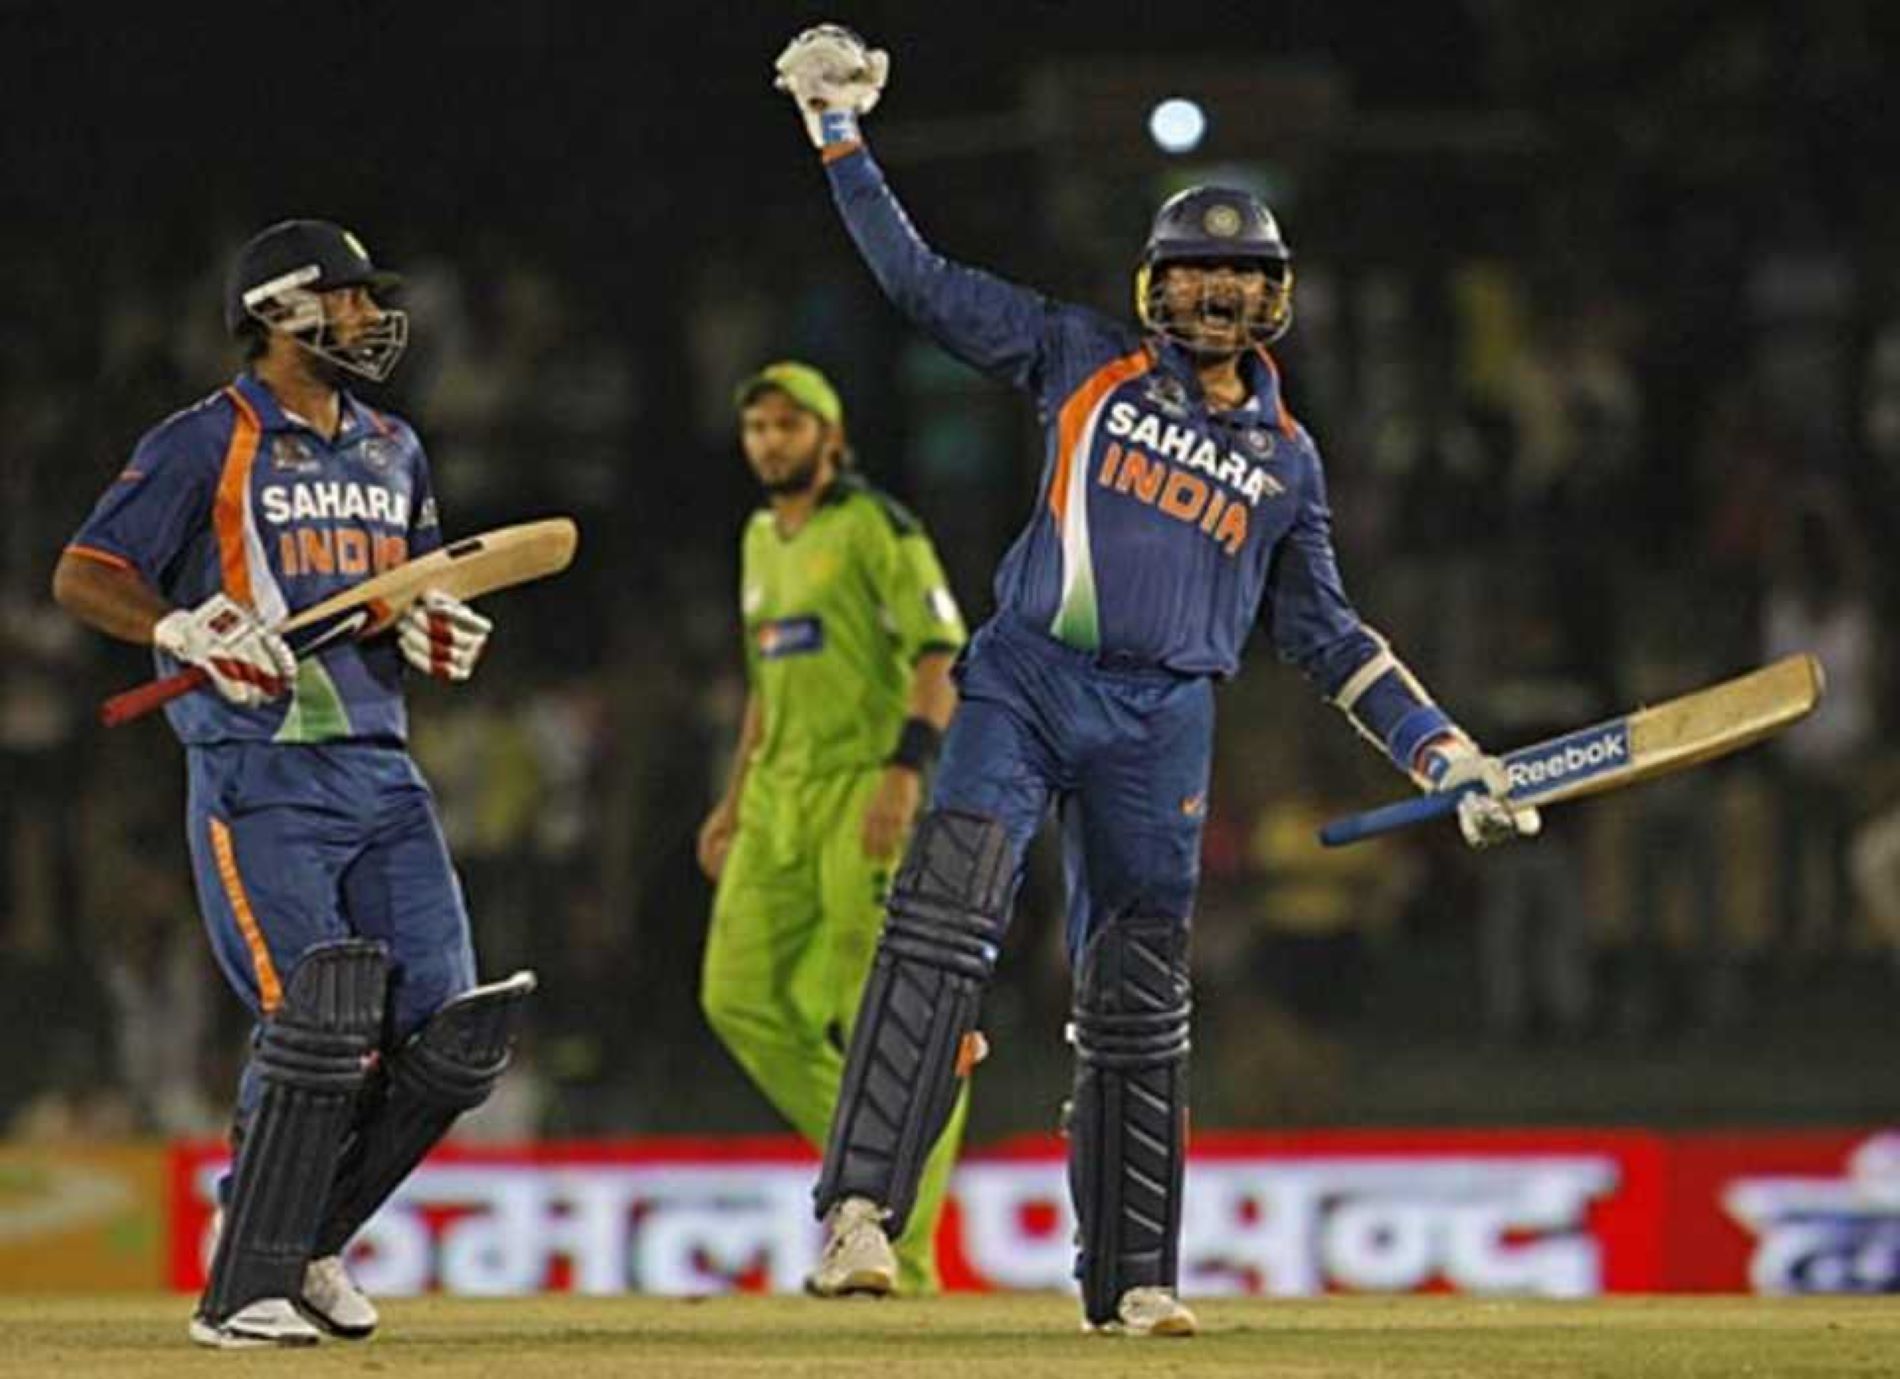 Harbhajan Singh produced a memorable finish to the Ind-Pak classic.